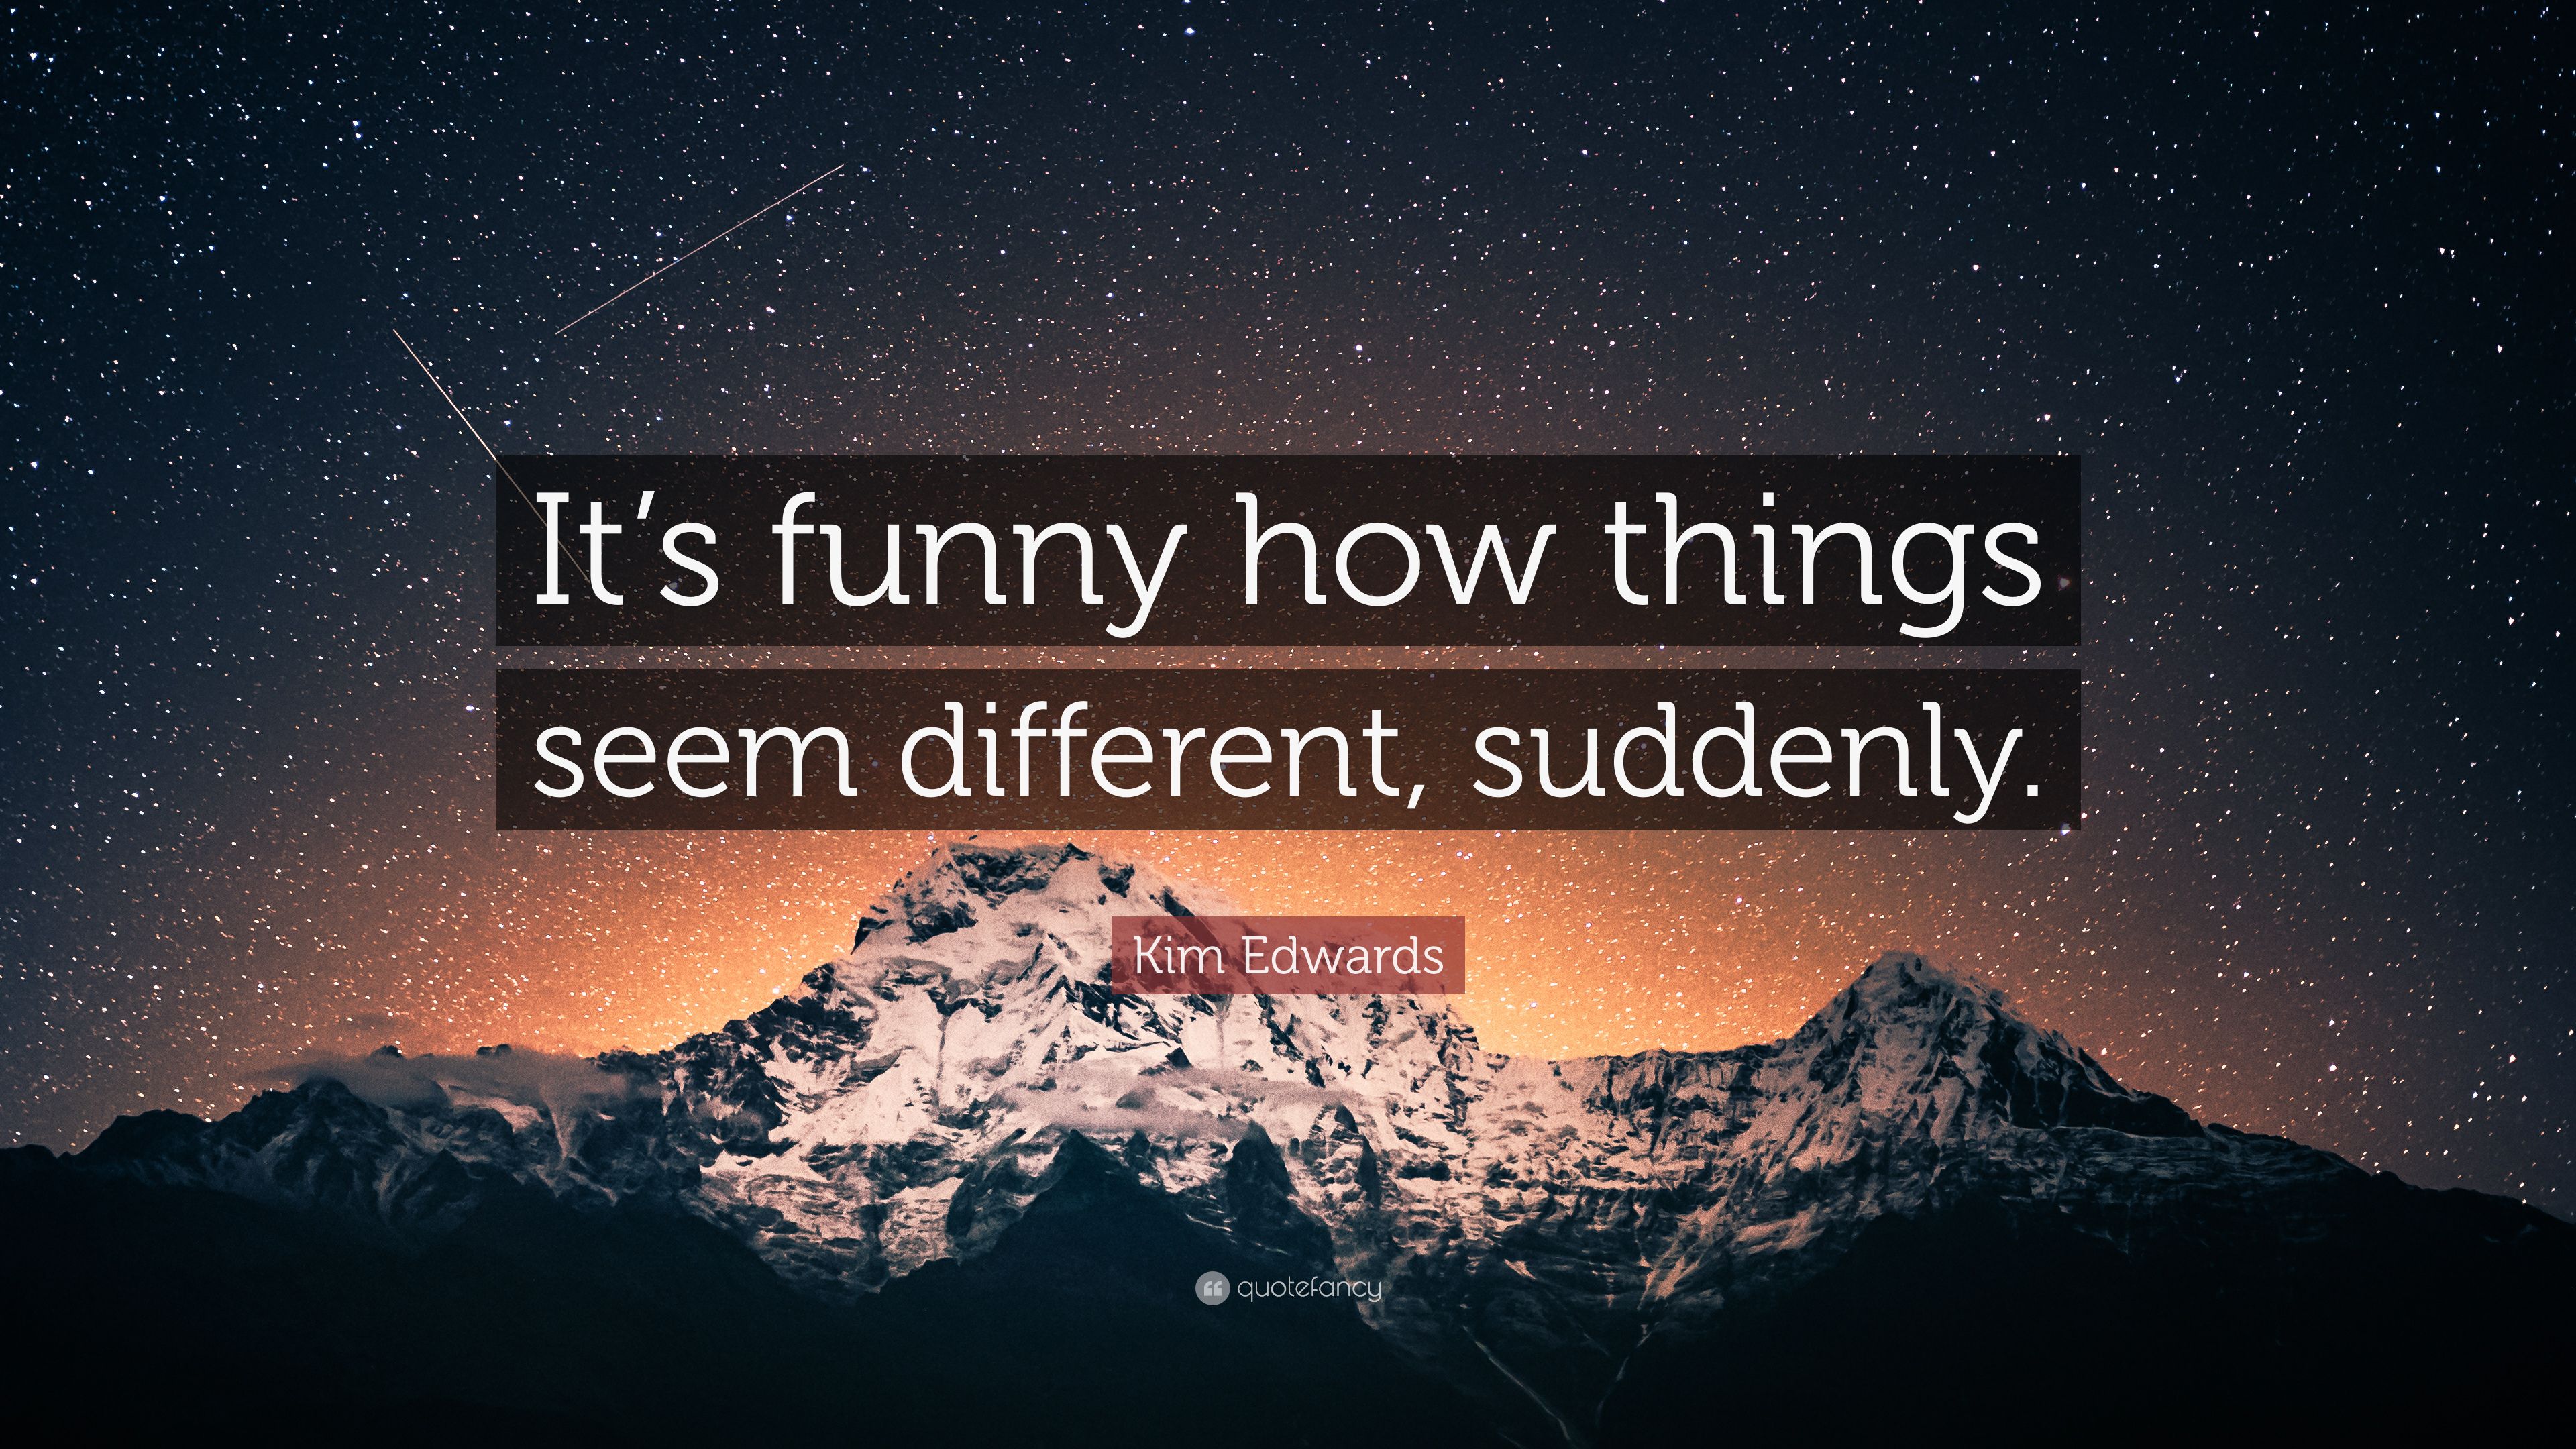 Kim Edwards Quote: “It's funny how things seem different, suddenly